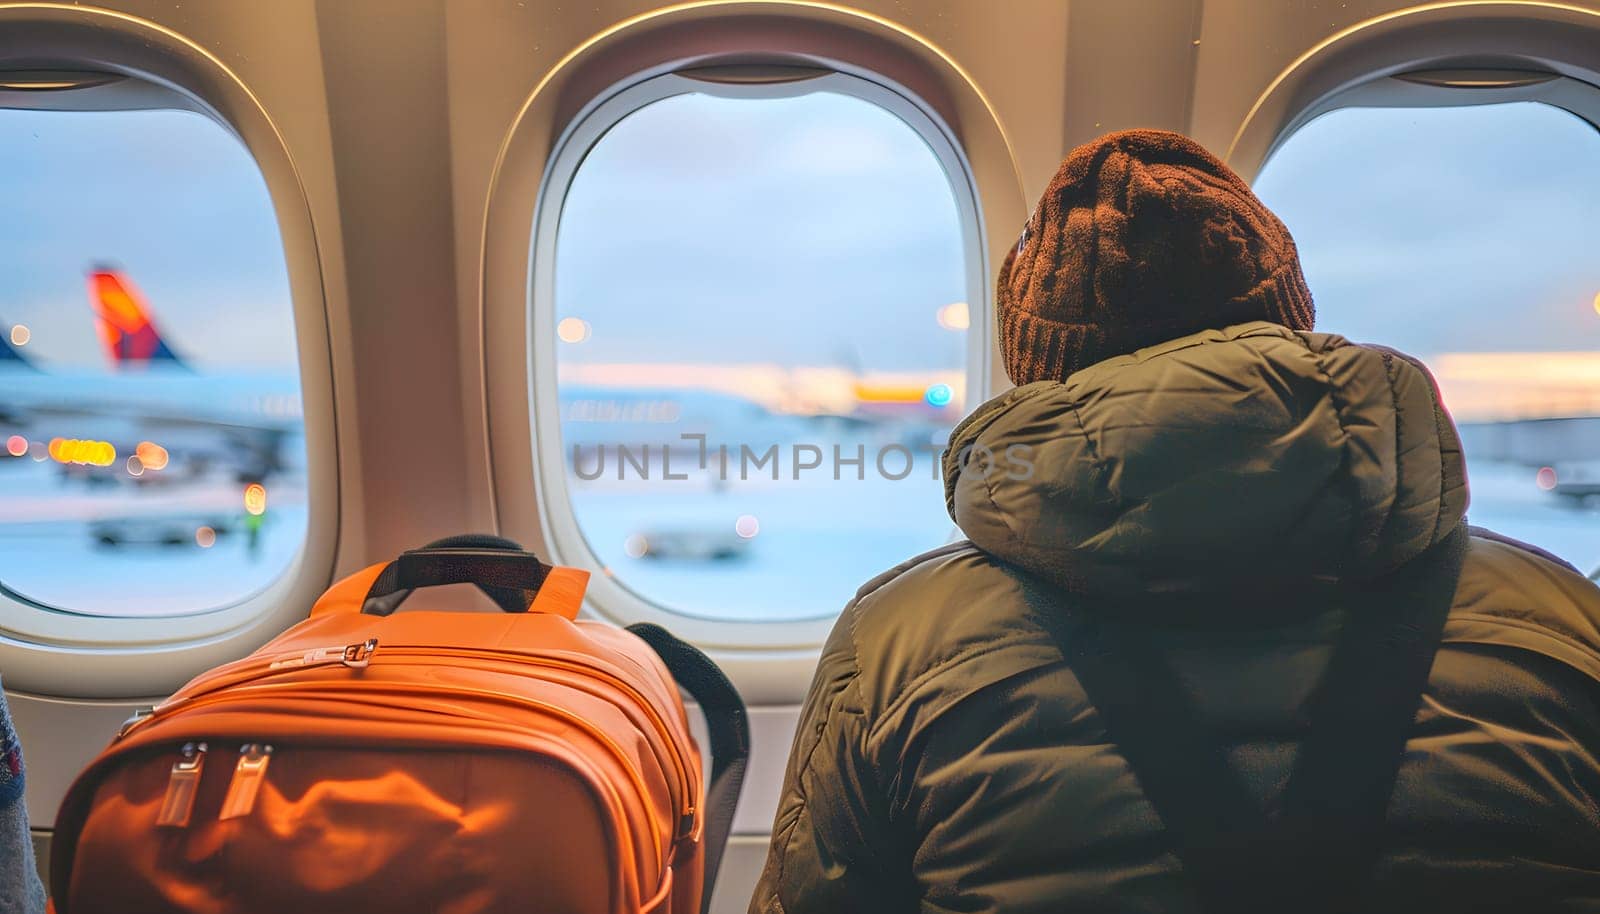 A traveler with a backpack sits inside an airplane, gazing out of the window at the scenic landscape below. They admire the water, buildings, and vehicles passing by during their air travel journey